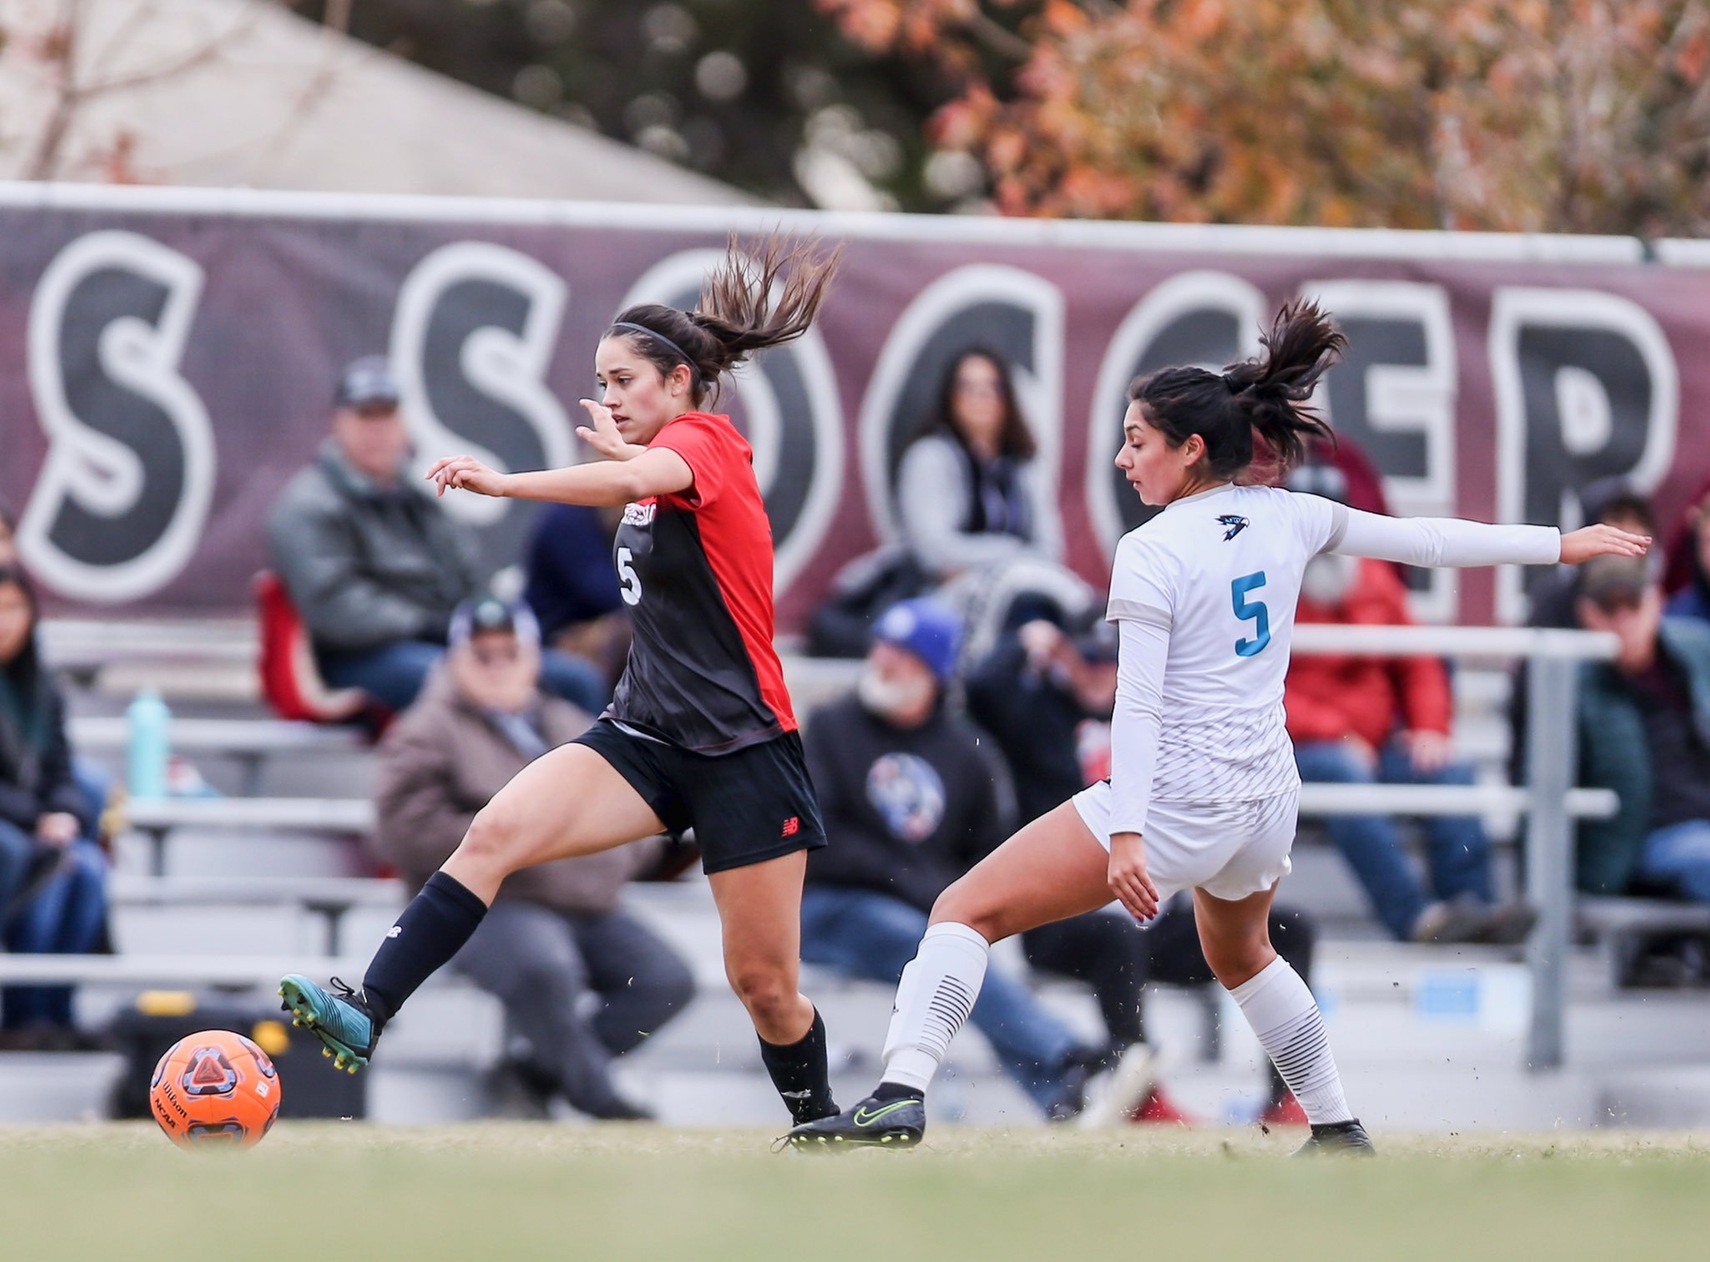 Falcons' season ends with 0-0 overtime draw at Fresno as Rams advance on PK's